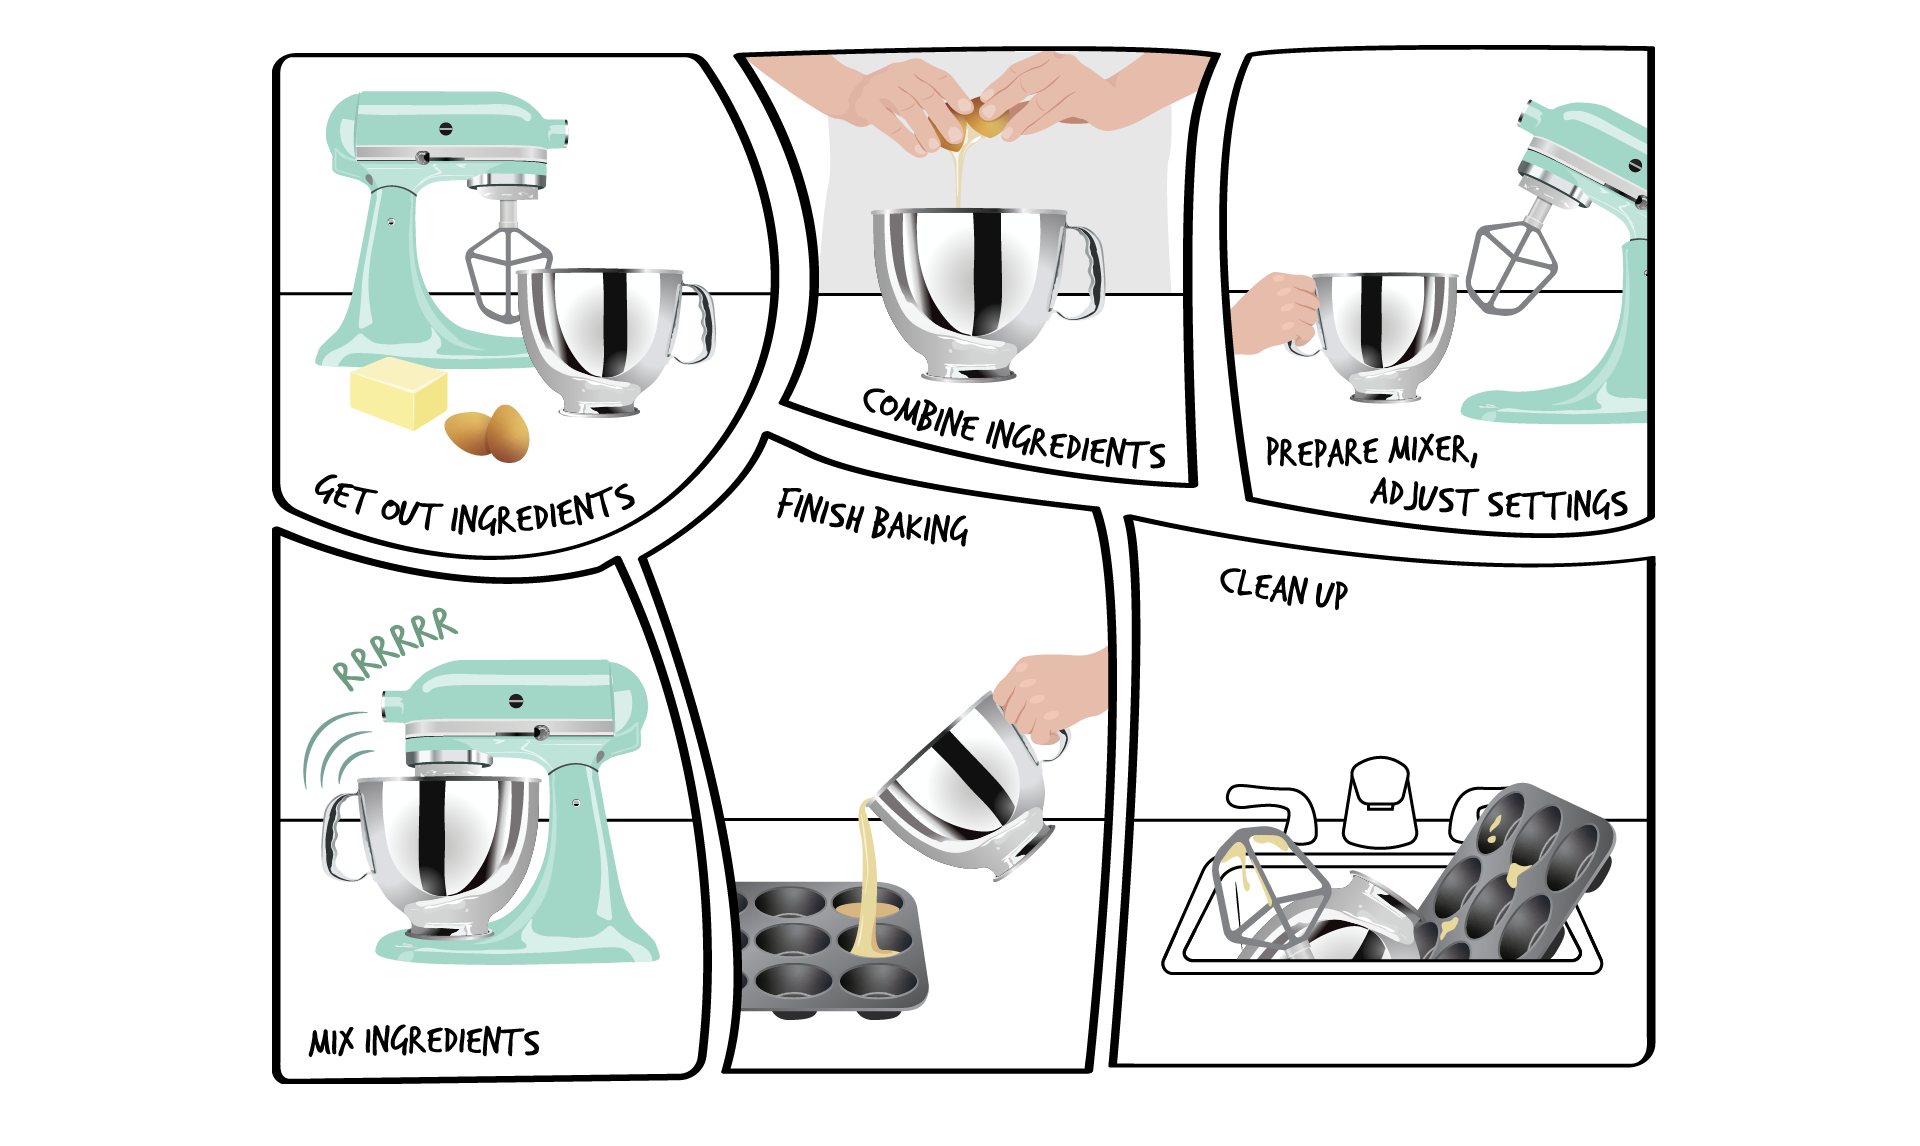 A sequence of steps for baking is shown in 6 steps The first shows a blue stand mixer with a stainless steel mixing bowl next to a block of butter and two eggs. Text reads: Get out ingredients. The second step shows a person cracking an egg into the mixing bowl. Text reads: Combine ingredients. The third step shows a hand holding the bowl next to the stand mixer. Text reads: Prepare mixer, adjust settings. The fourth step shows the stand mixer mixing ingredients in bowl. Three curved lines above bowl representing noise from mixer with text RRR above. Text below: Mix ingredients. The fifth step shows a hand pouring the batter into muffin tray. Text reads: Finish baking. The final step shows all of the dishes in a sink with text Clean up.